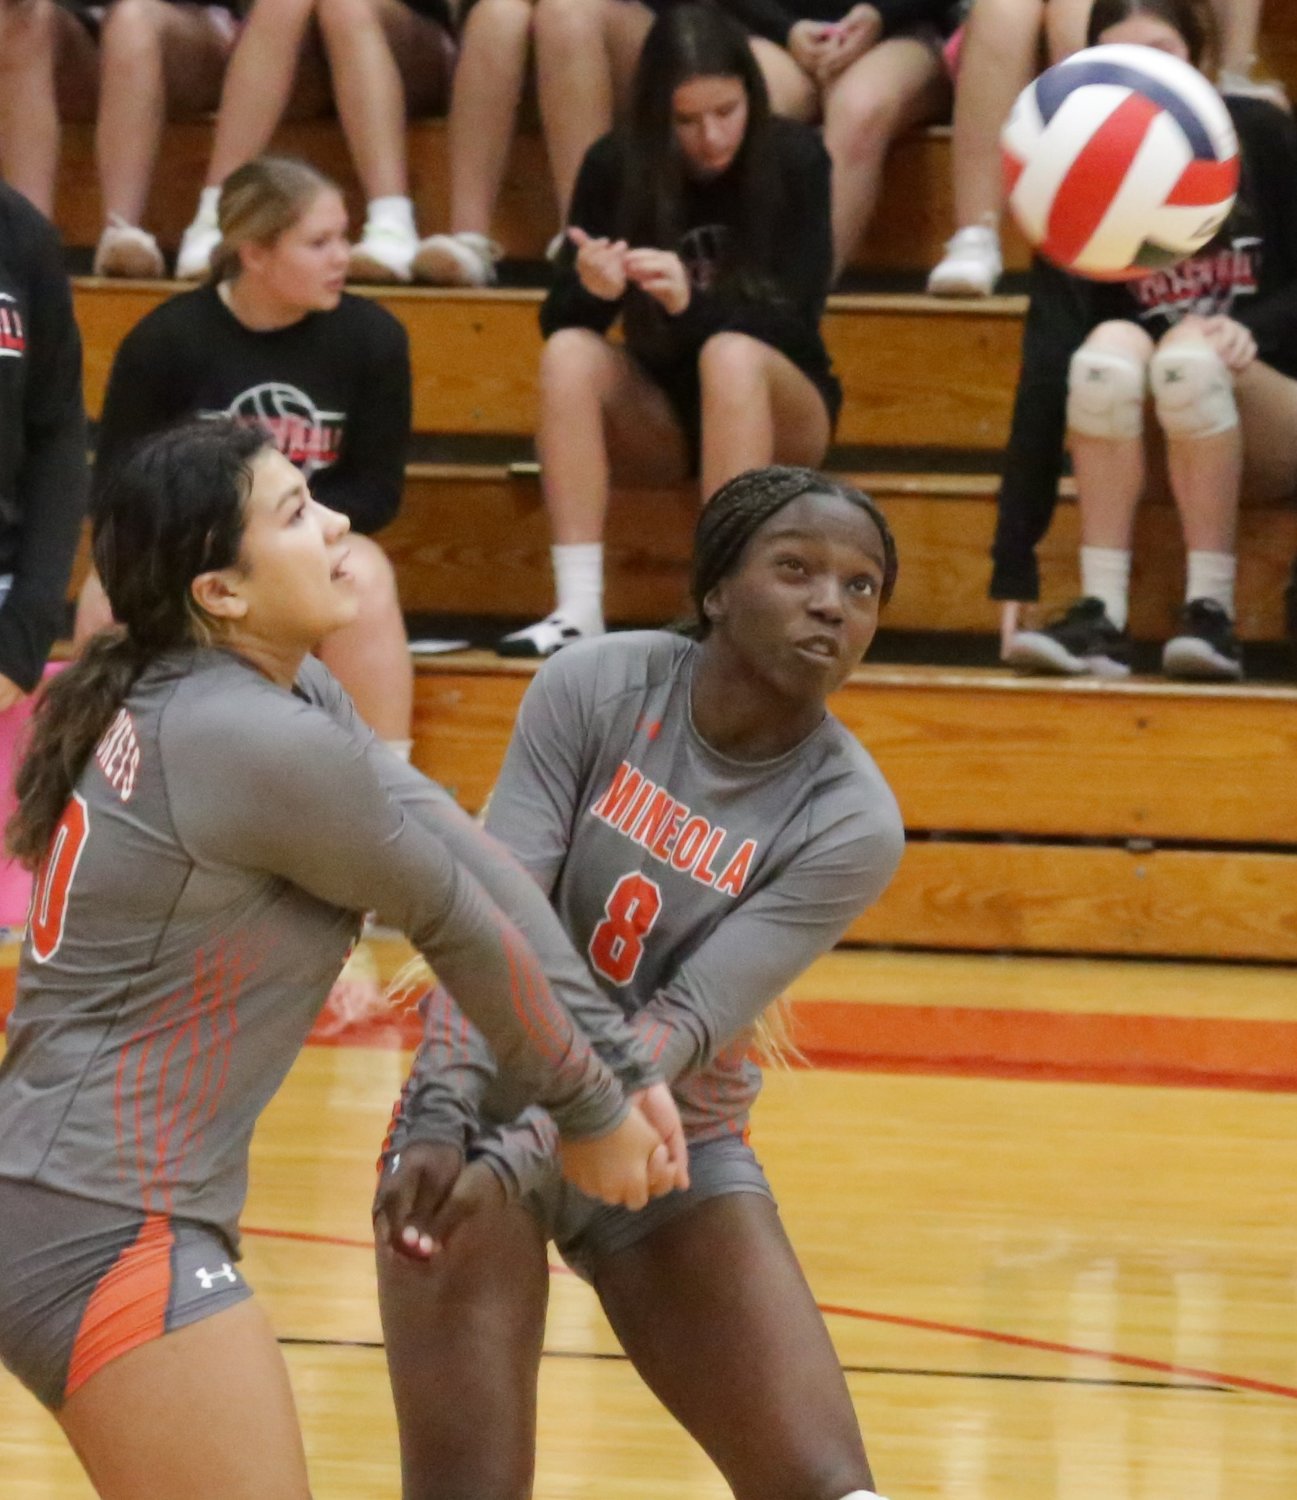 The Lady Jackets struggled against the Harmony Lady Eagles last Friday, who handed Mineola their first loss in district play. Mineola remains atop the district table. Here Kloey garcia and Shylah Kratzmeyer negotiate a return.